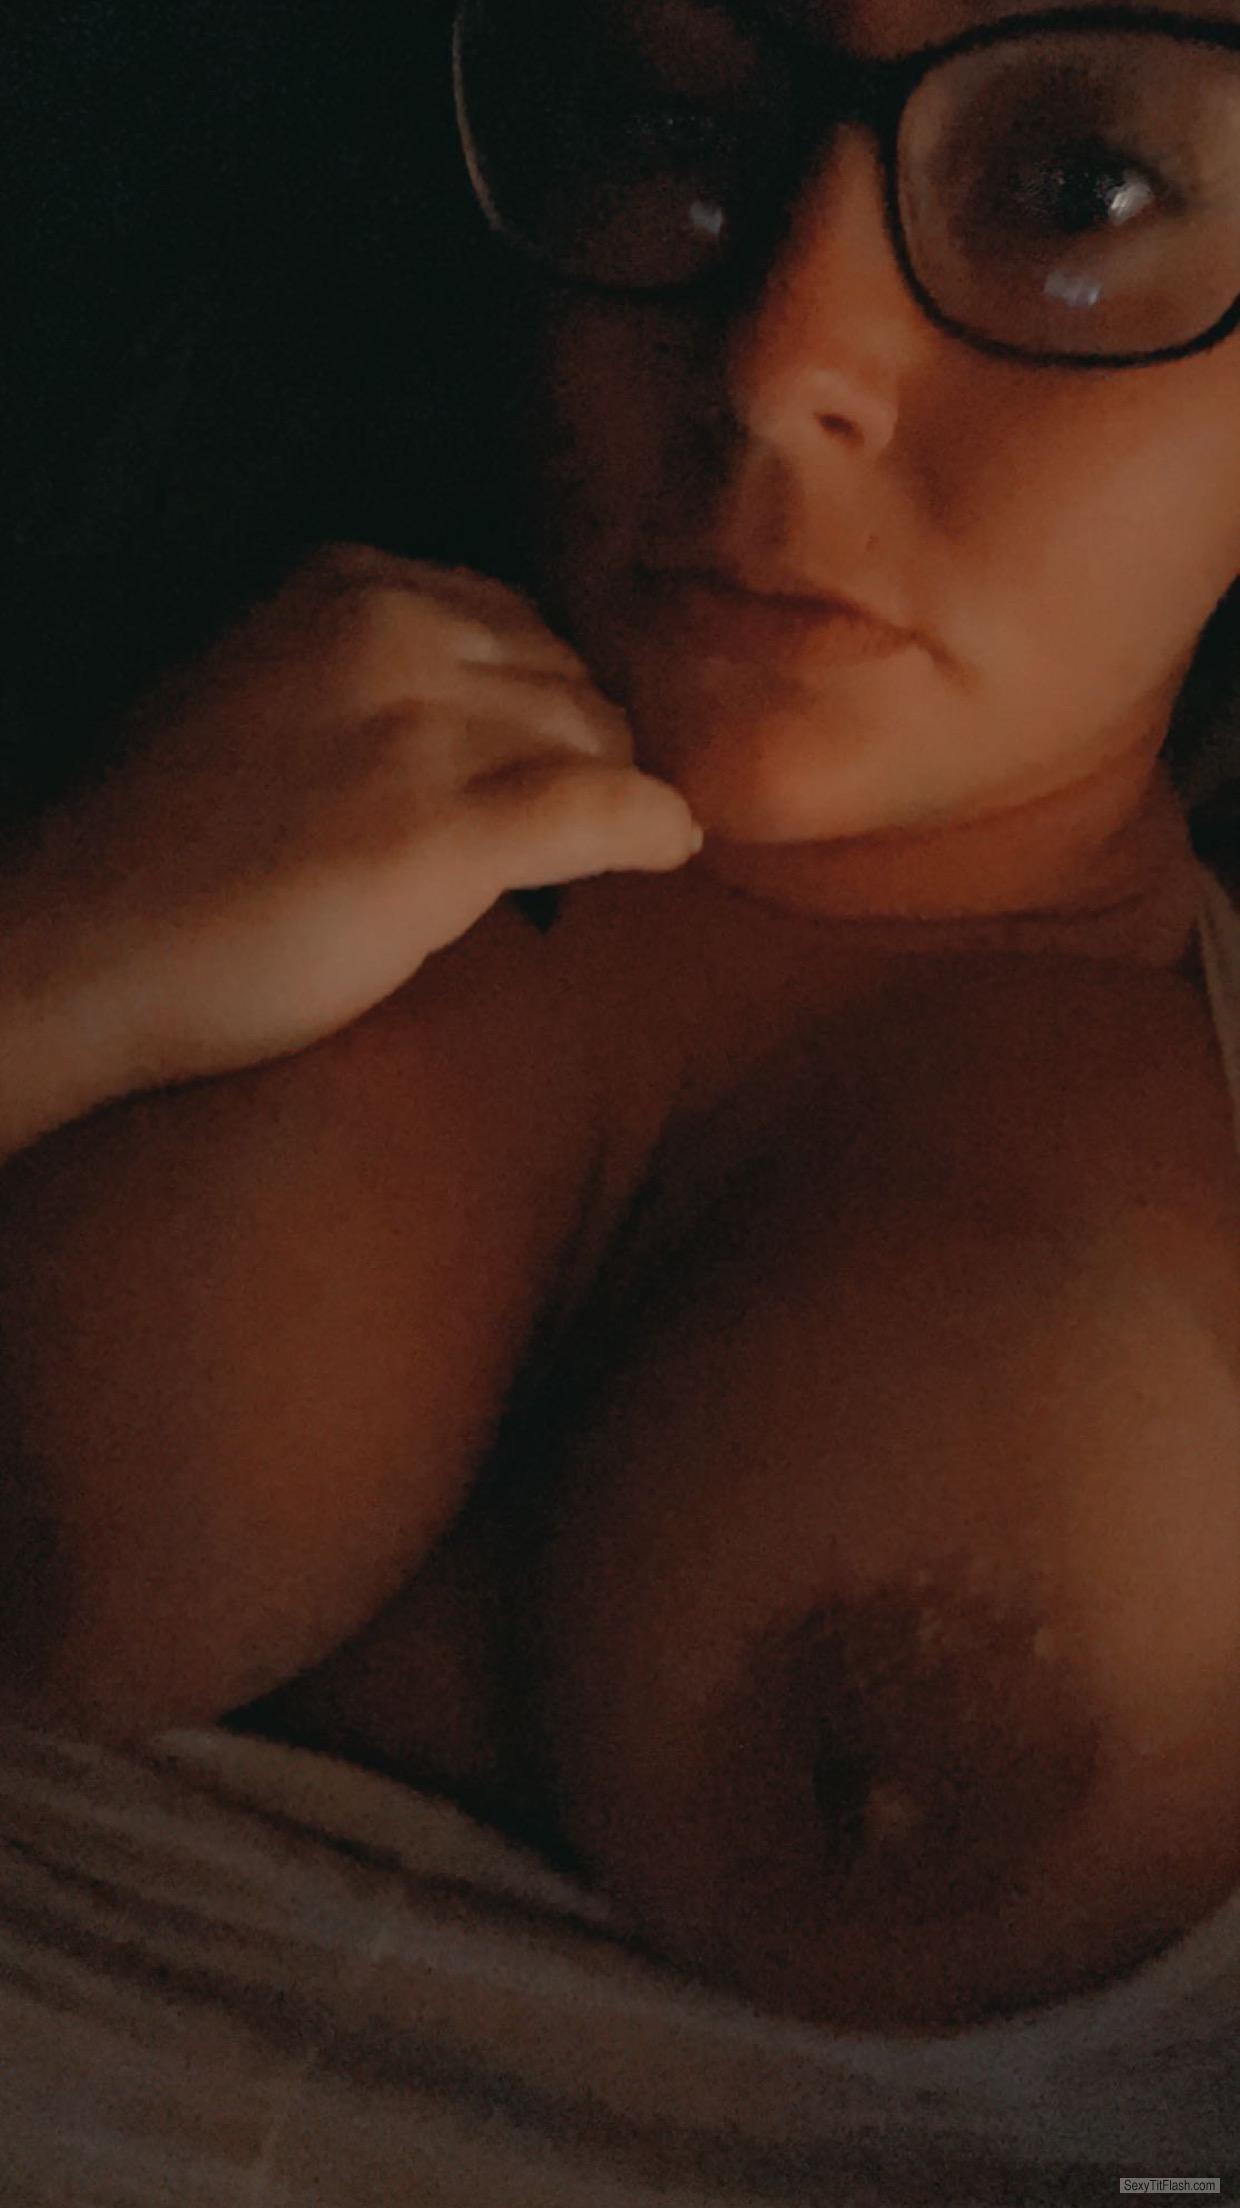 Tit Flash: My Friend's Medium Tits - Topless Naughty Girl from United States